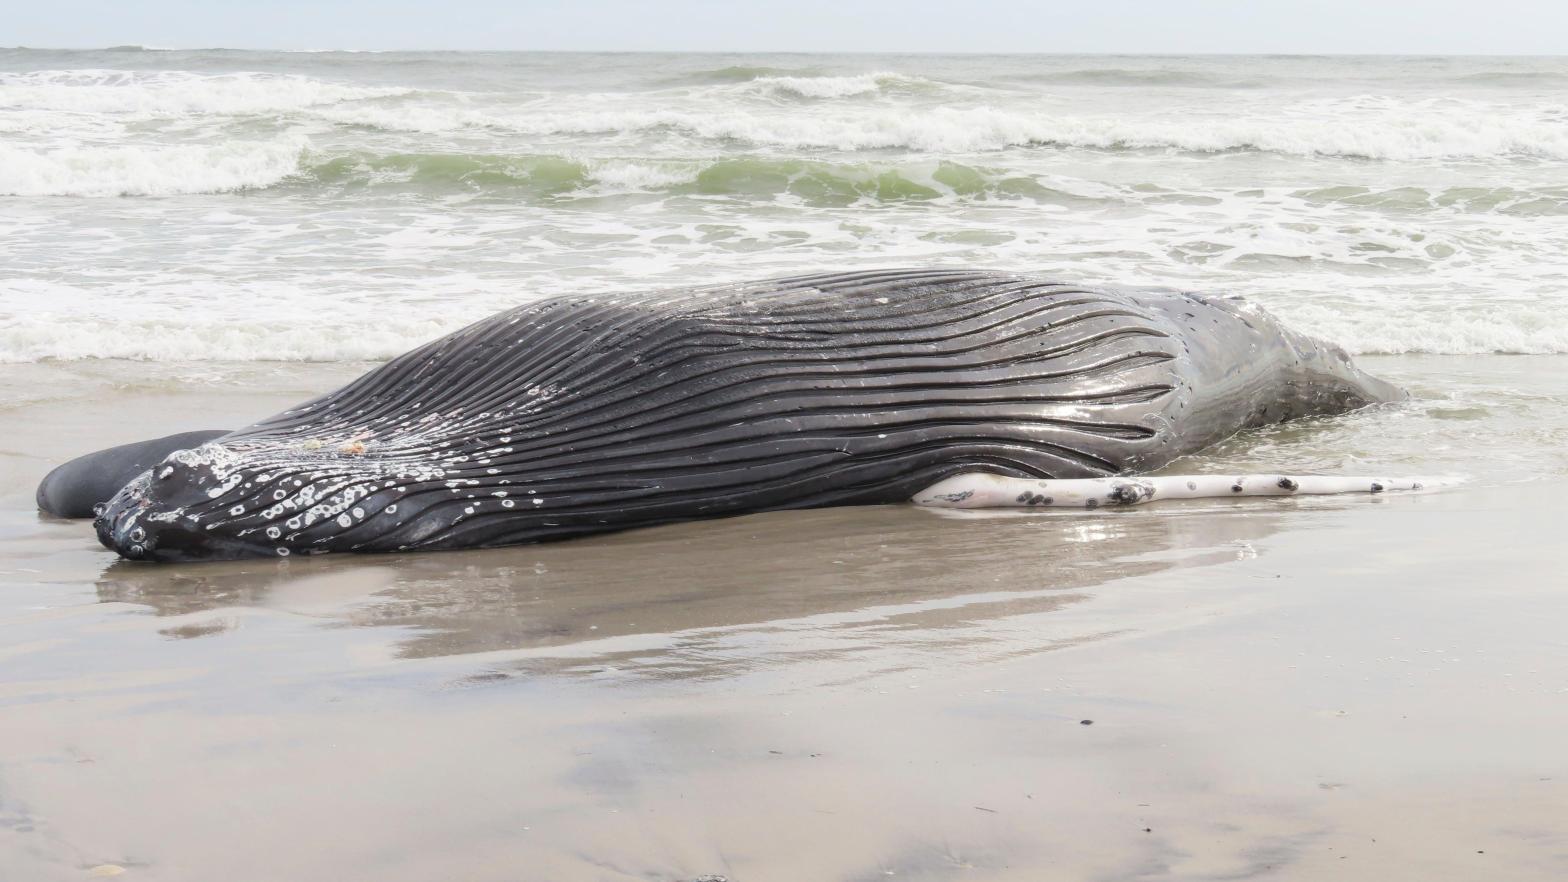 The body of a humpack whale lies on a beach in Brigantine N.J., after it washed ashore on Friday, January. 13, 2023 (Photo: Wayne Parry, AP)